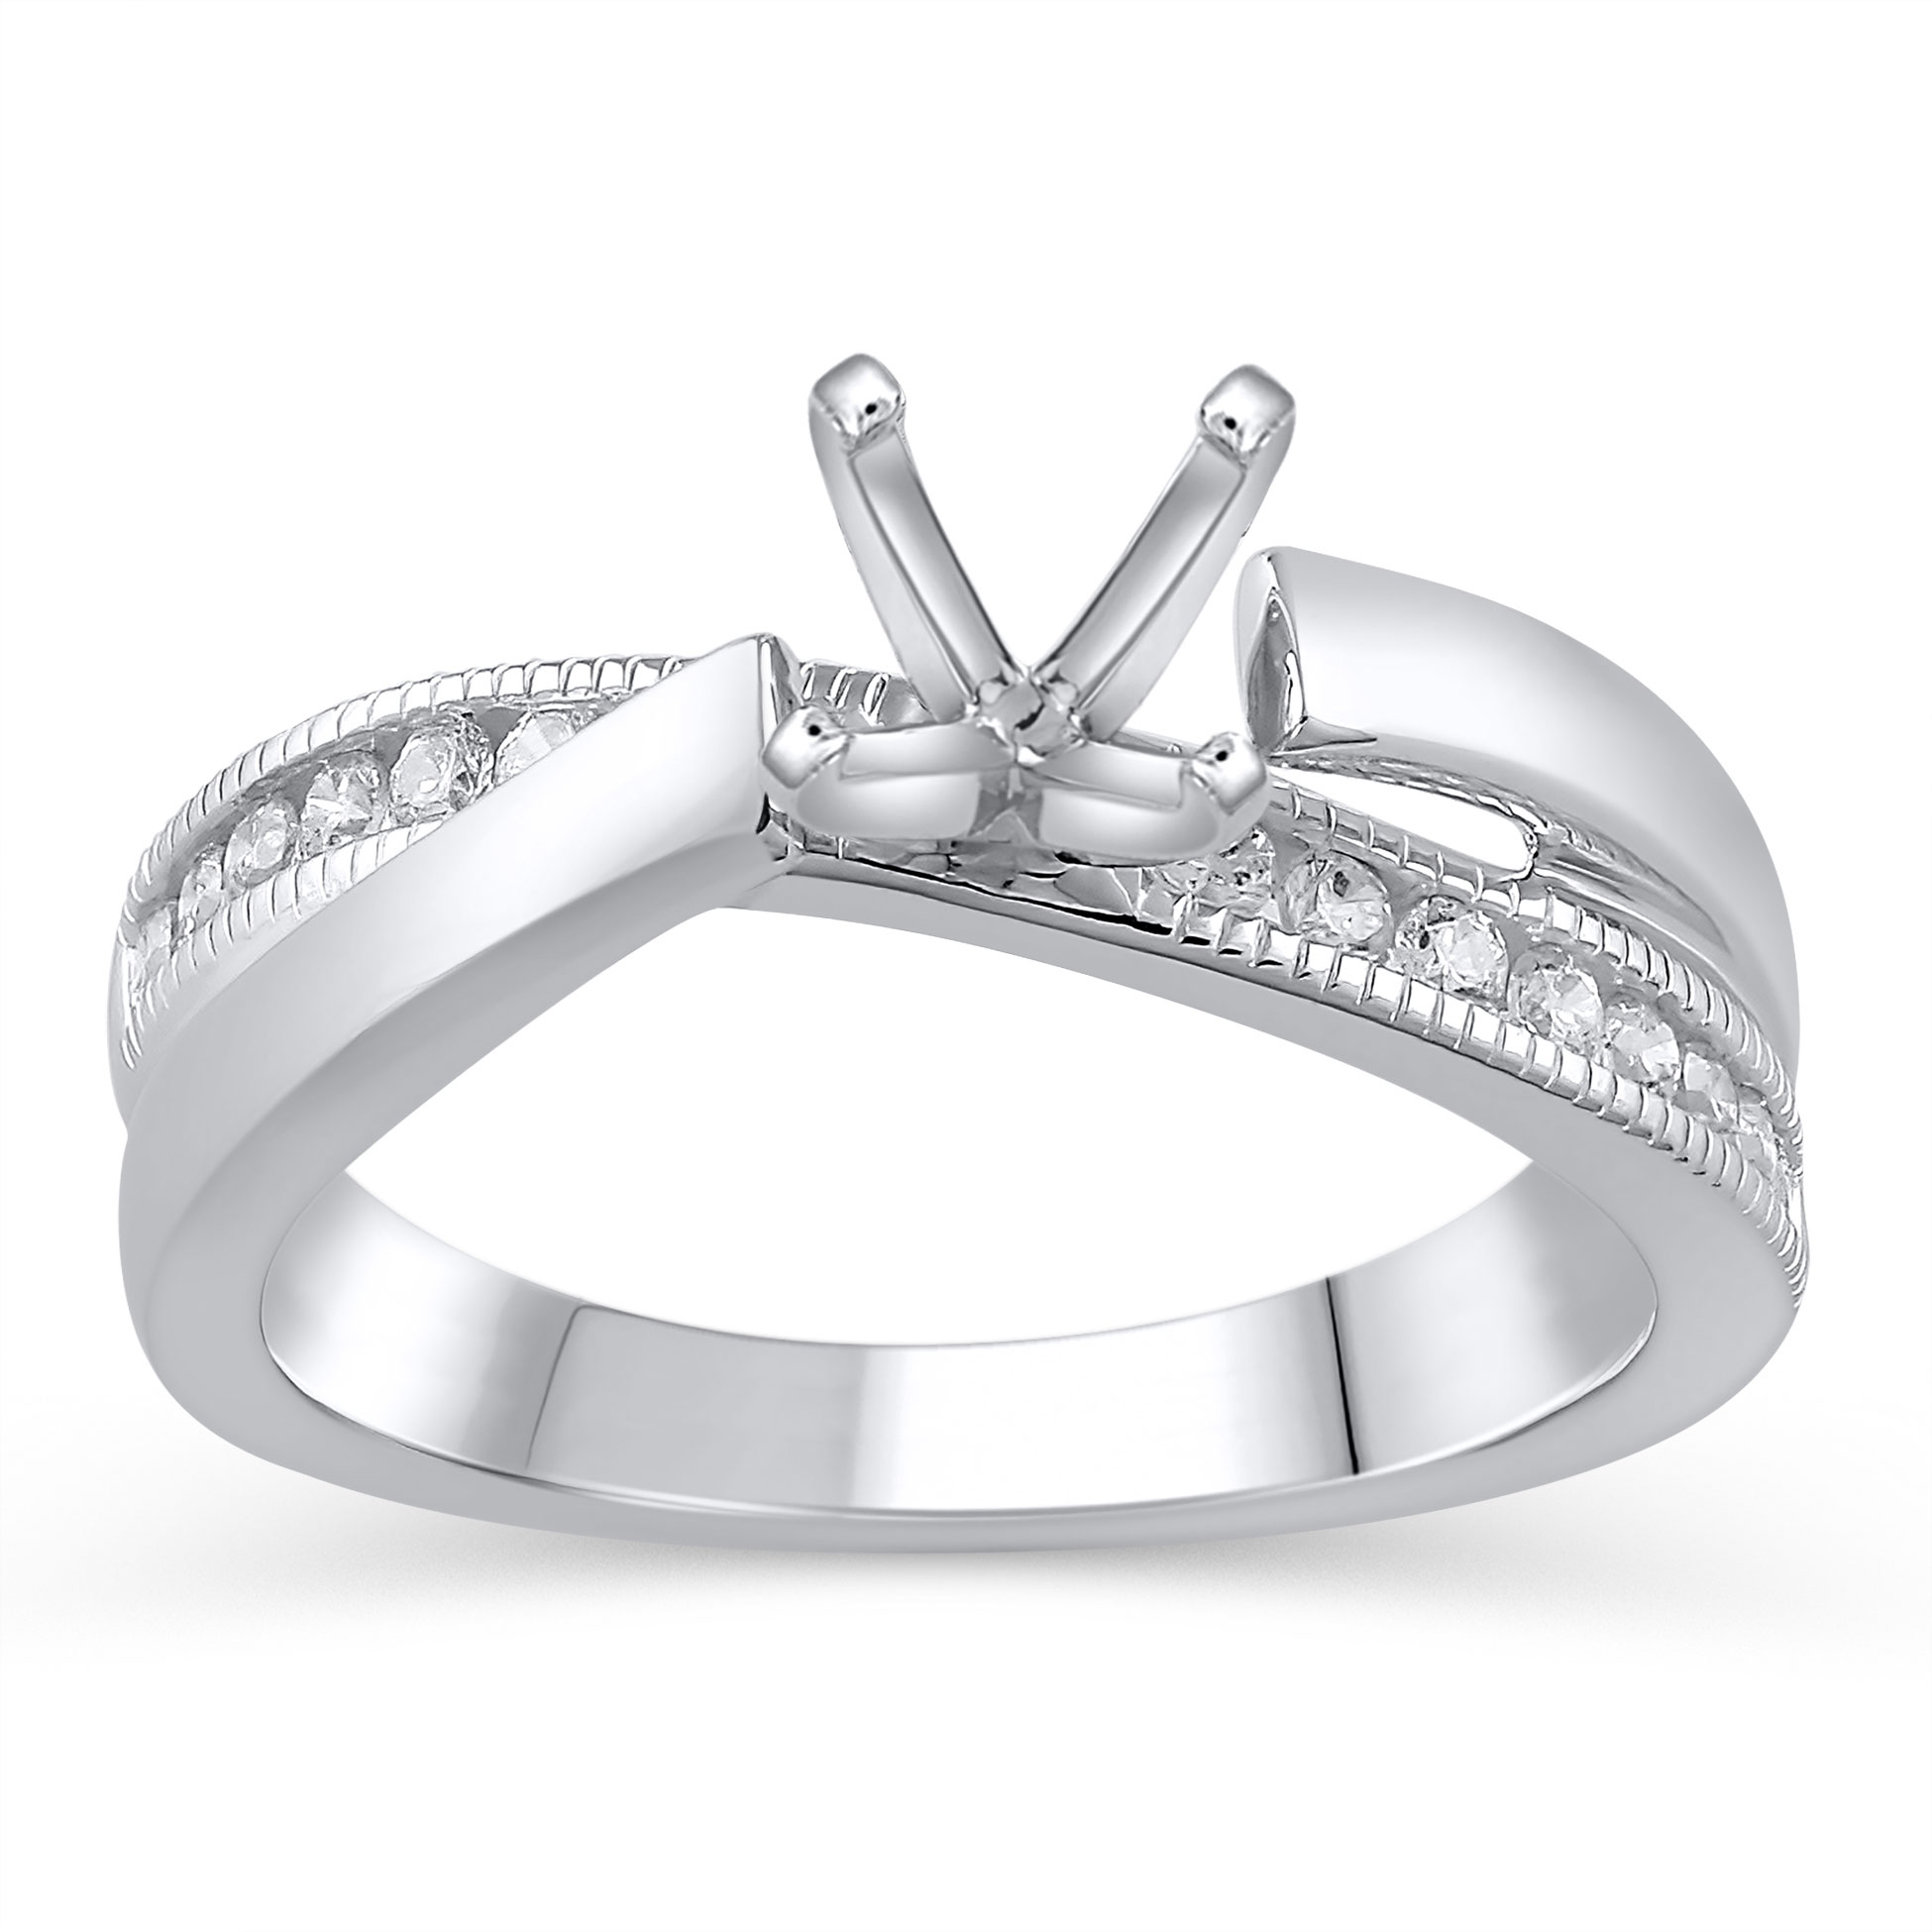 1/4ctw Diamond Asymmetrical White Gold Engagement Ring Setting | Design Collection | Size 6